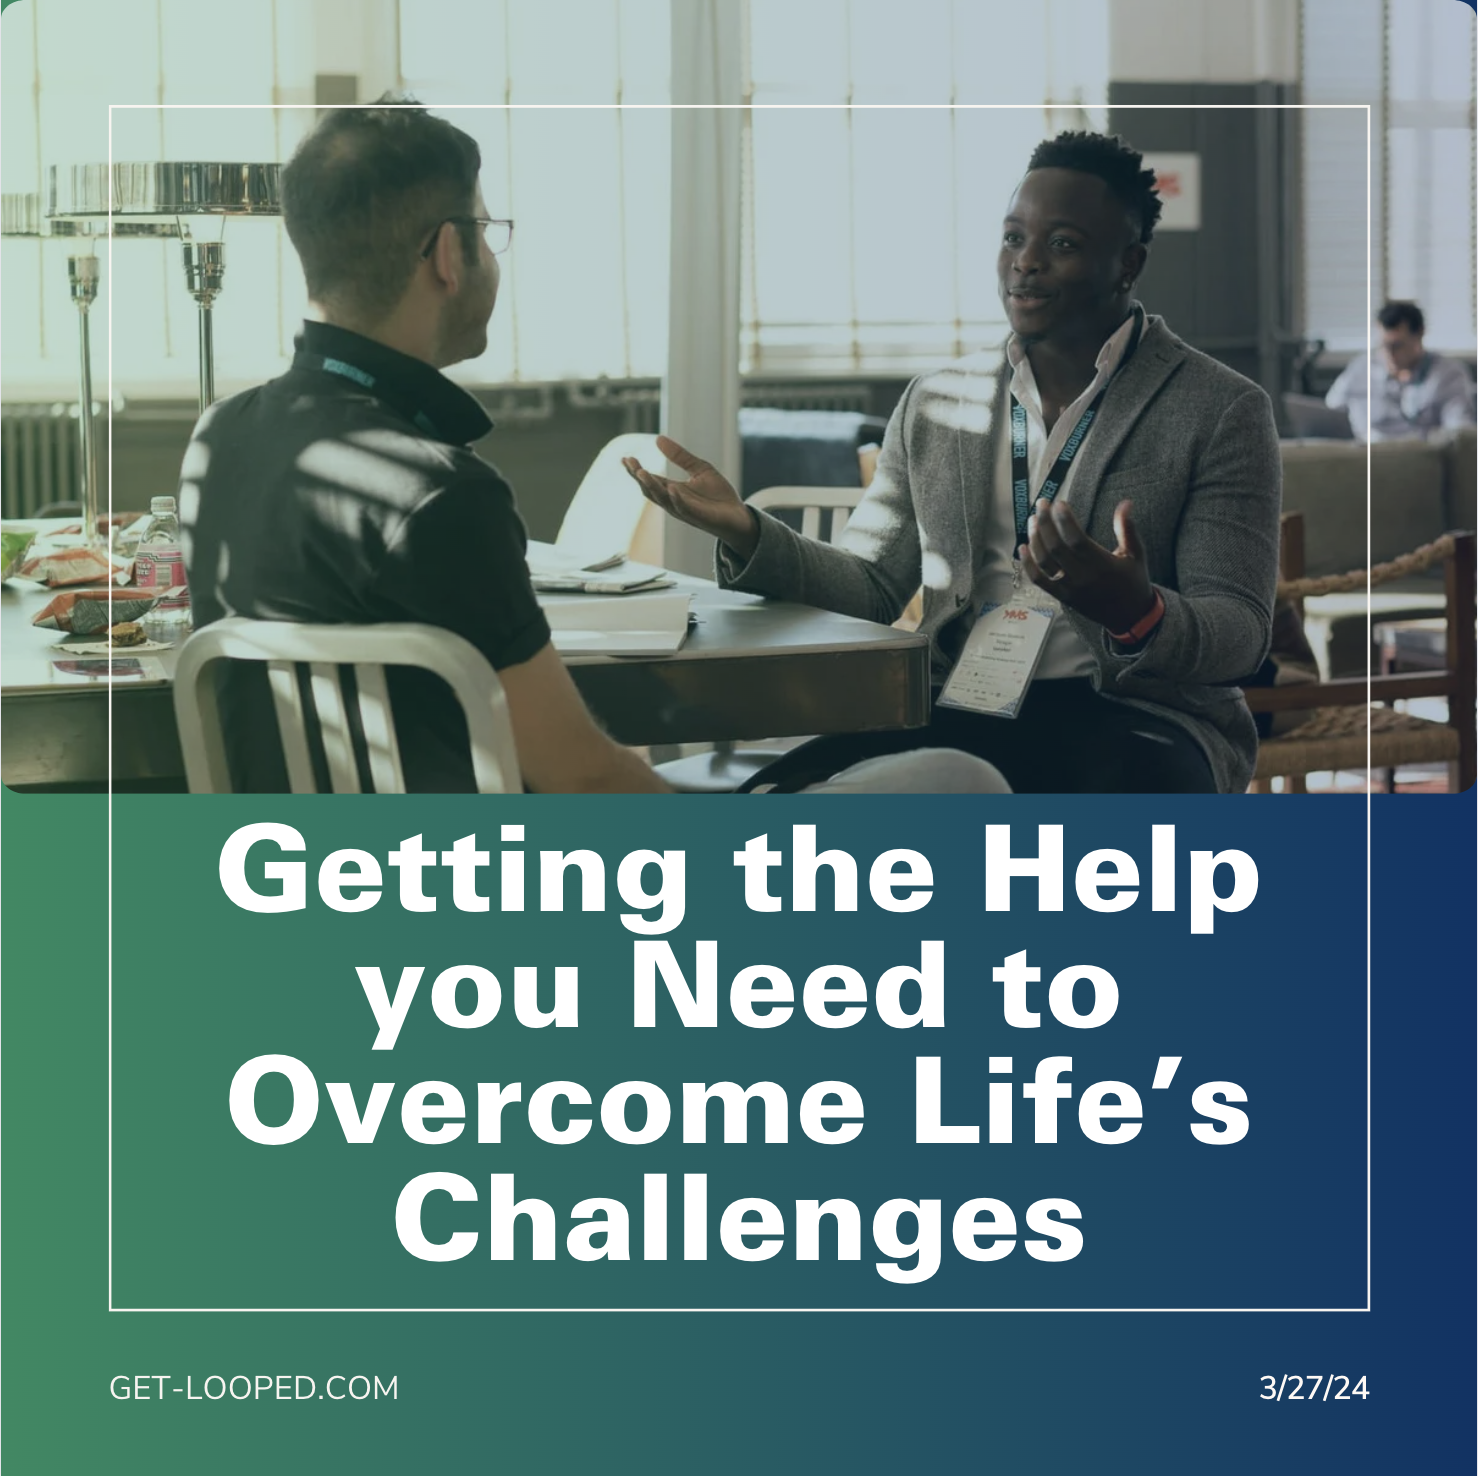 Getting the Help you Need to Overcome Life’s Challenges